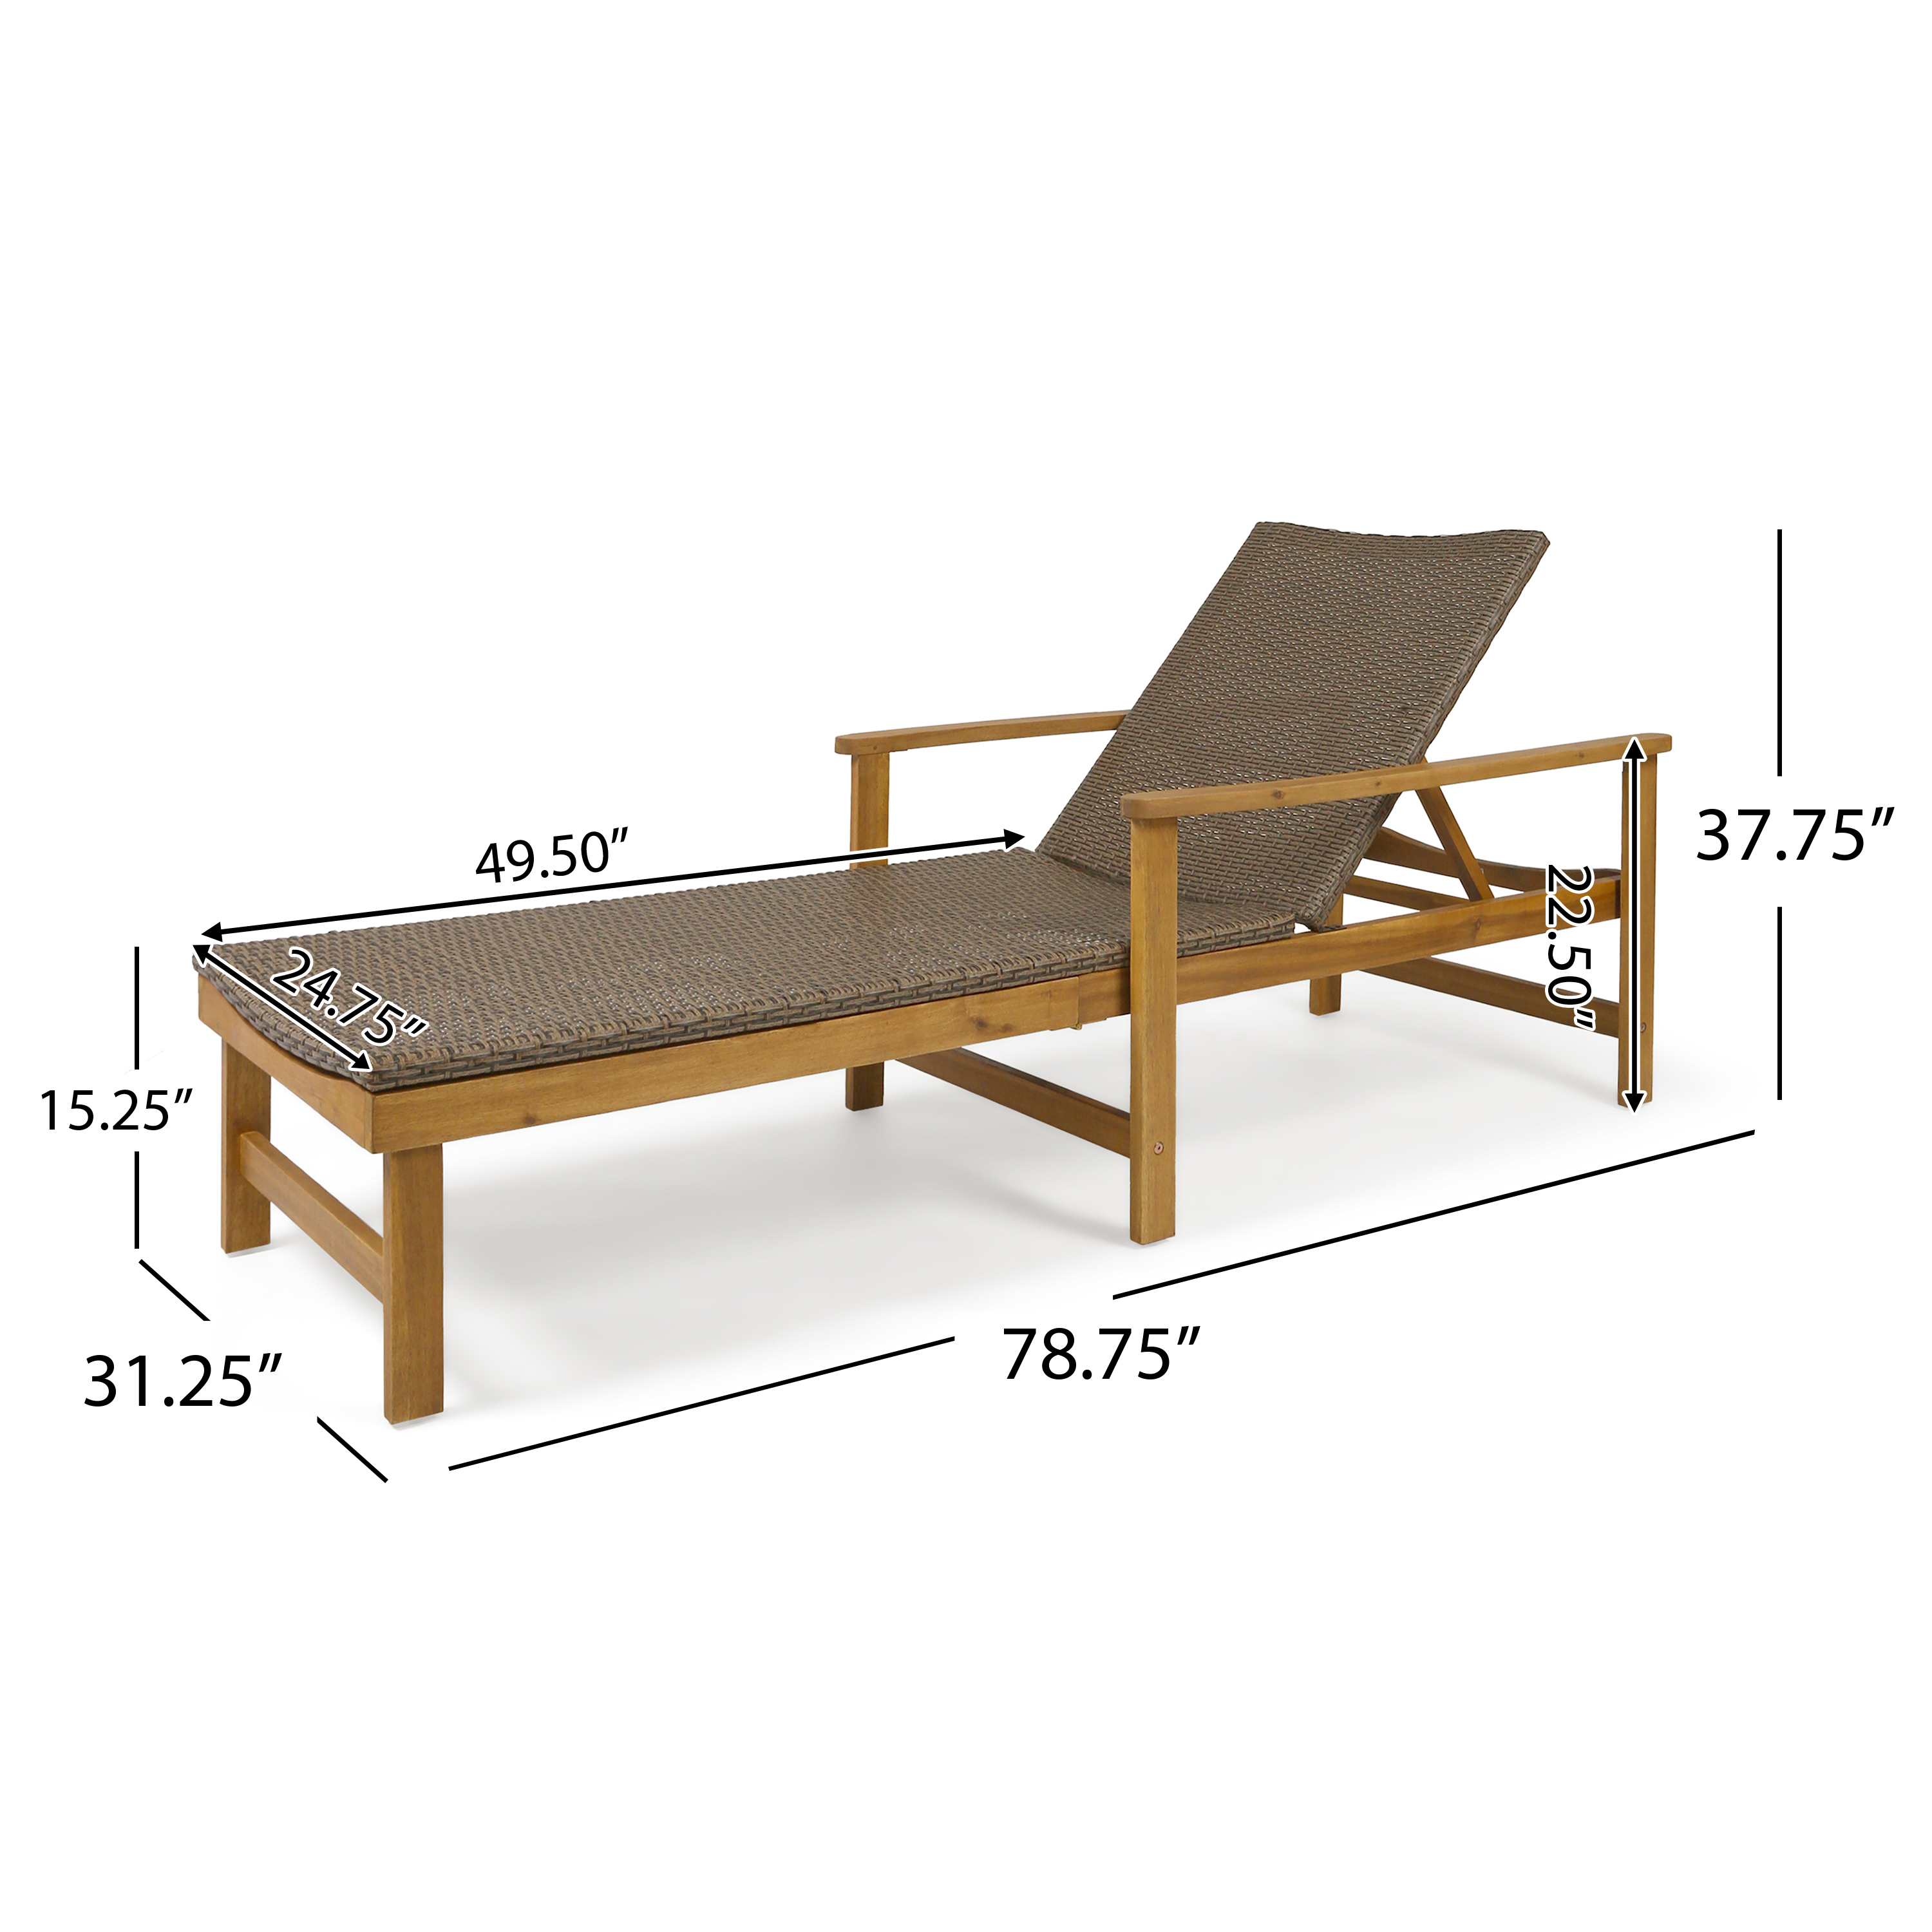 Kyle Outdoor Rustic Natural Acacia Wood Chaise Lounge with Wicker Seat, Natural Brown and Mixed Mocha - image 5 of 10